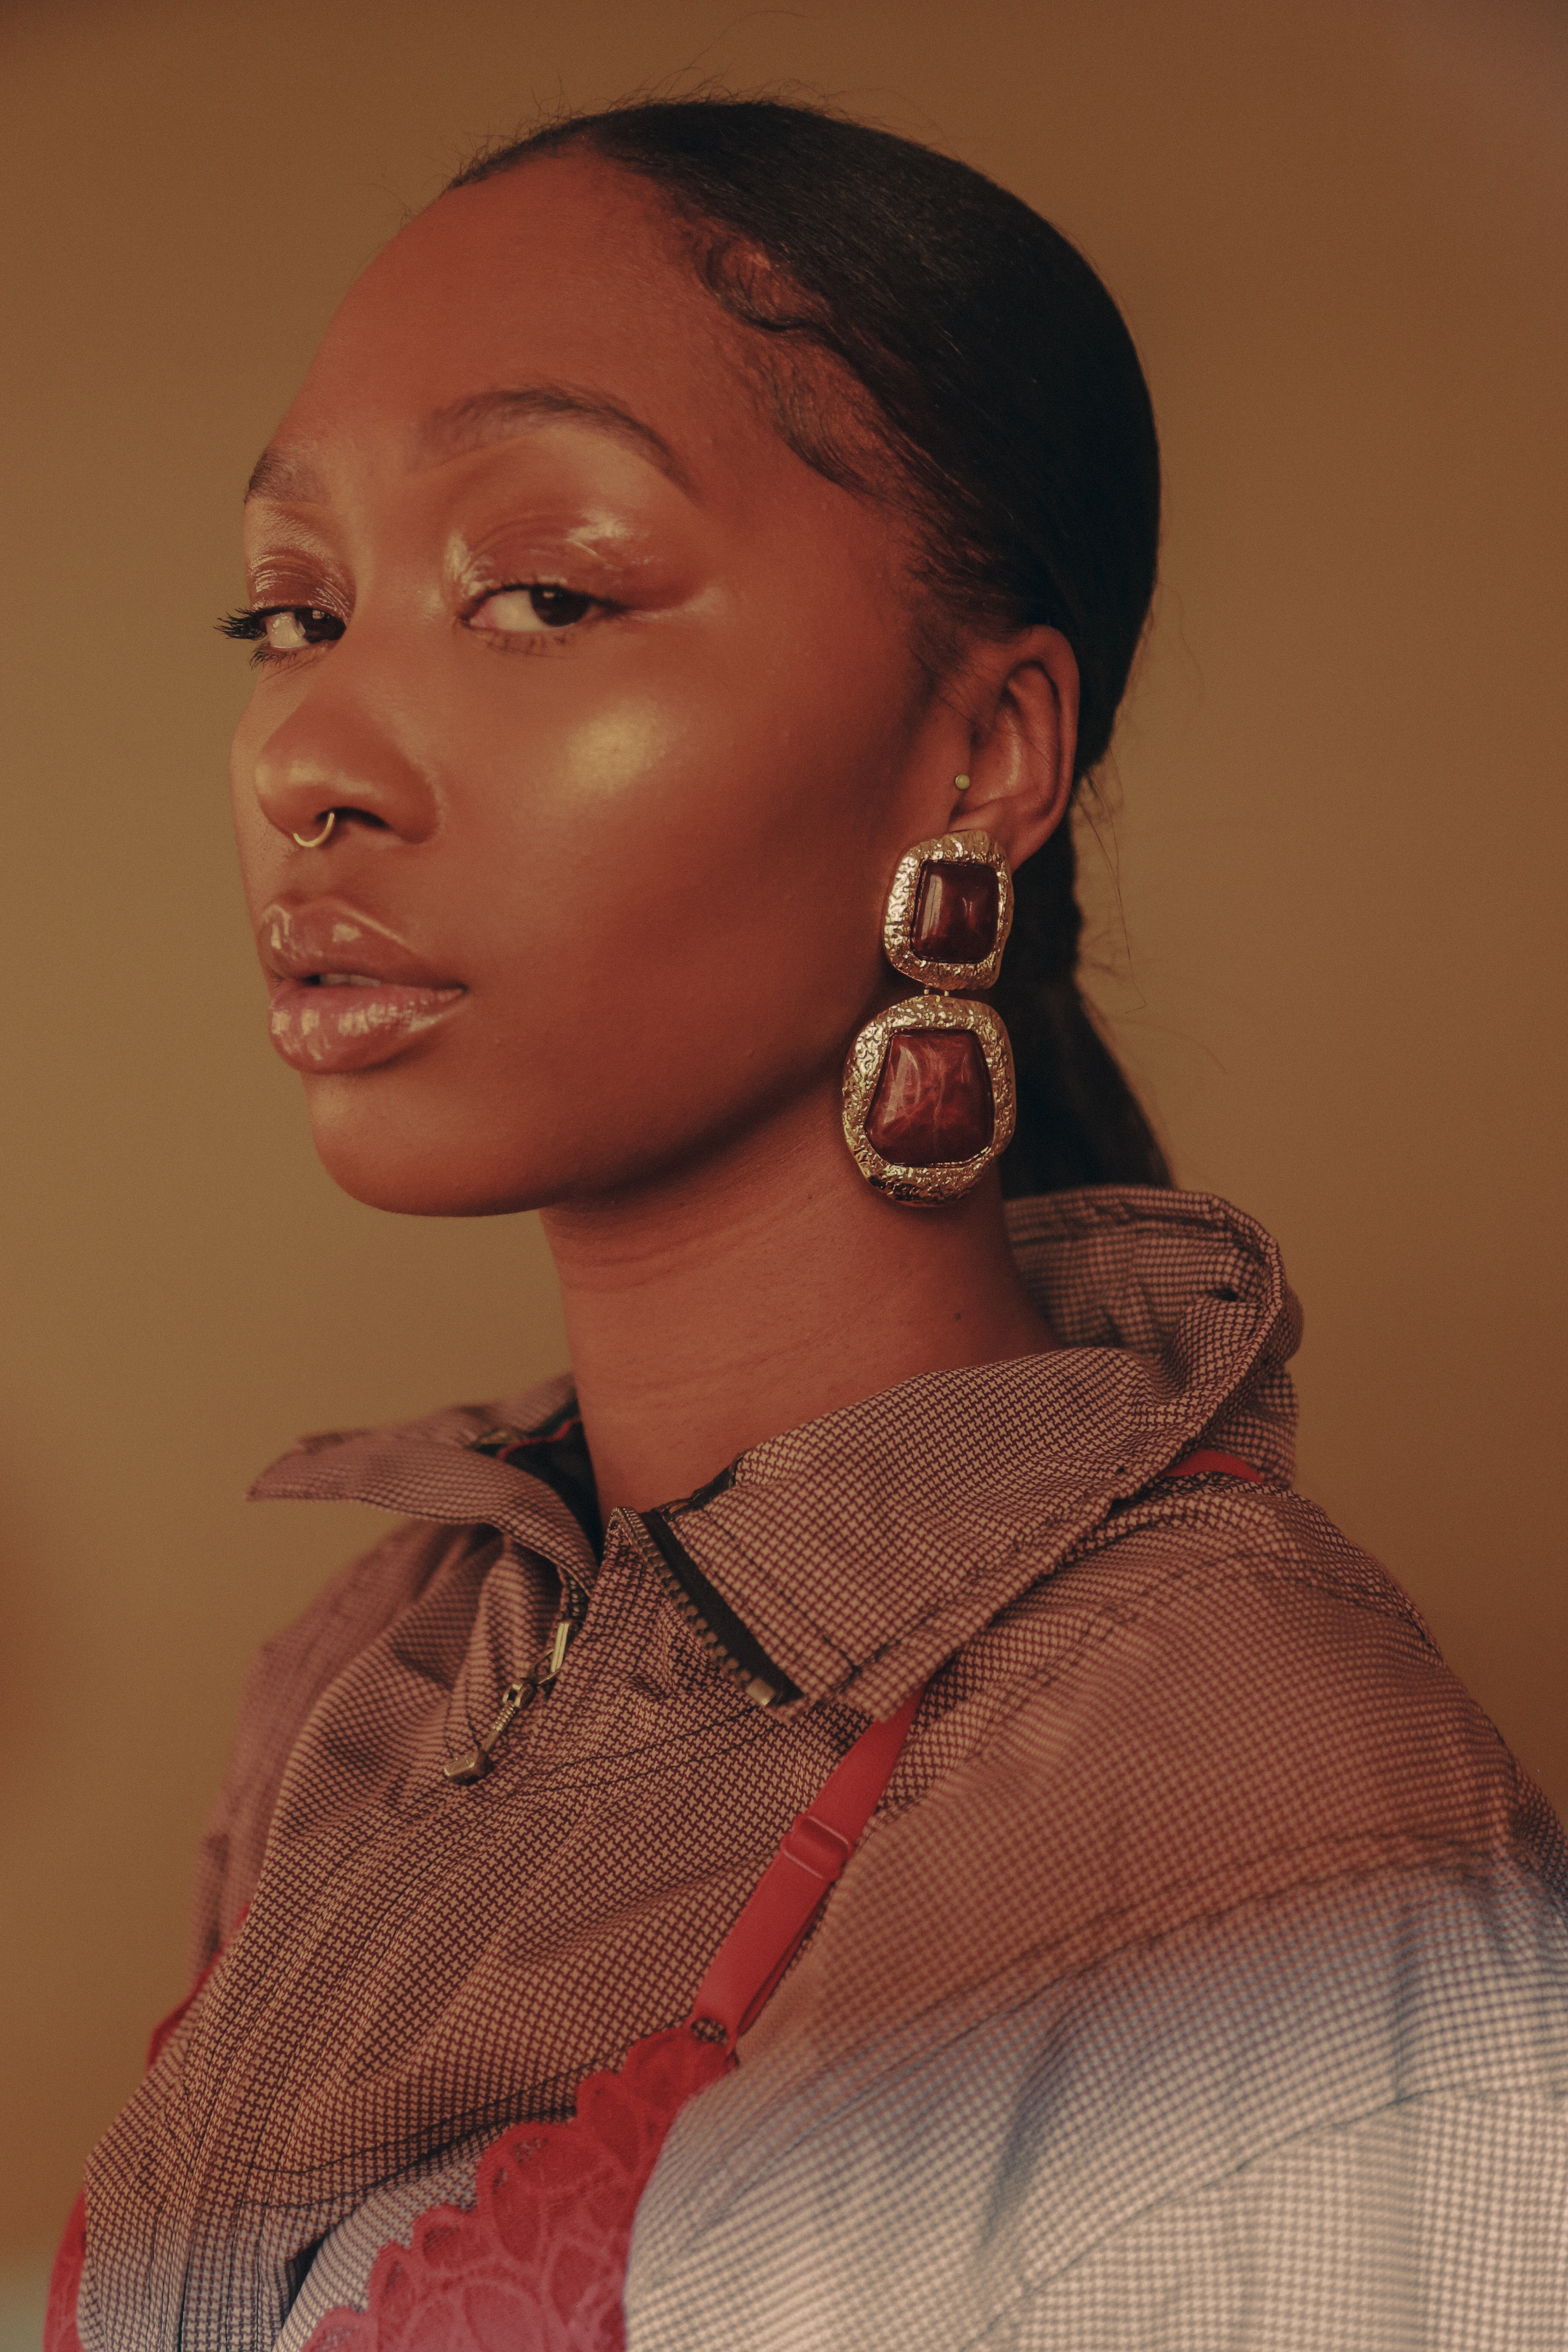 Black woman with nose ring and statement earrings by Bree Holt